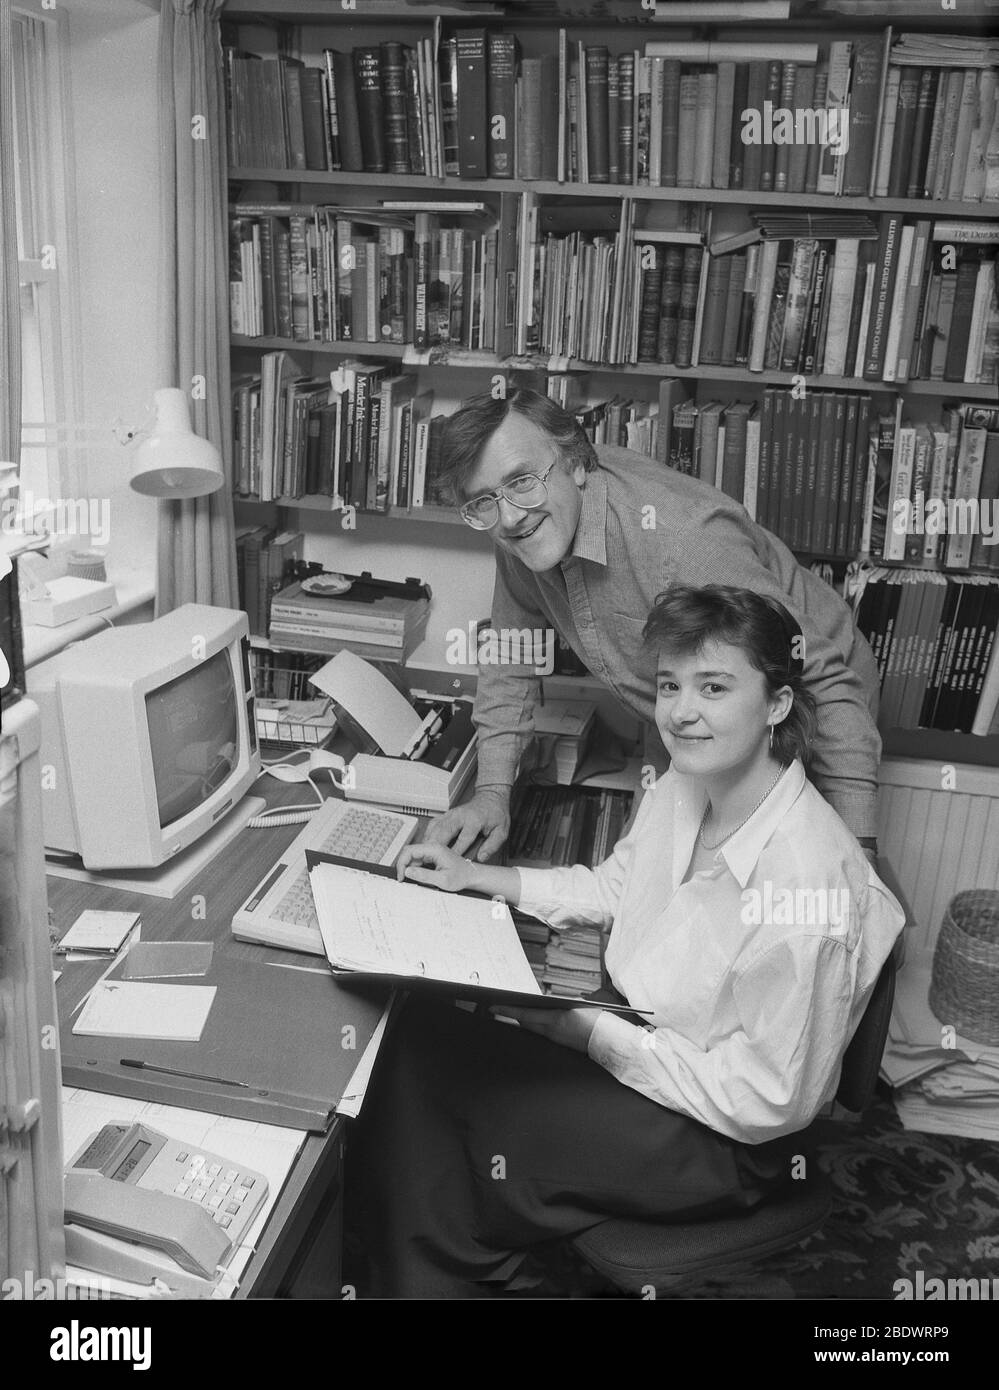 1987, historical, a couple working in a home office. In a compact book-lined study, technology seen on the desk... a computer of the day, keyboard and printer, and telephone. The introduction of the personal computer or PC at this time meant that working from home was far more possible than before. The year 1987 saw the release of the microsoft Windows 2 operating system which introduced a number of popular computing concepts, including windows, desktop icons and colour graphics. Stock Photo